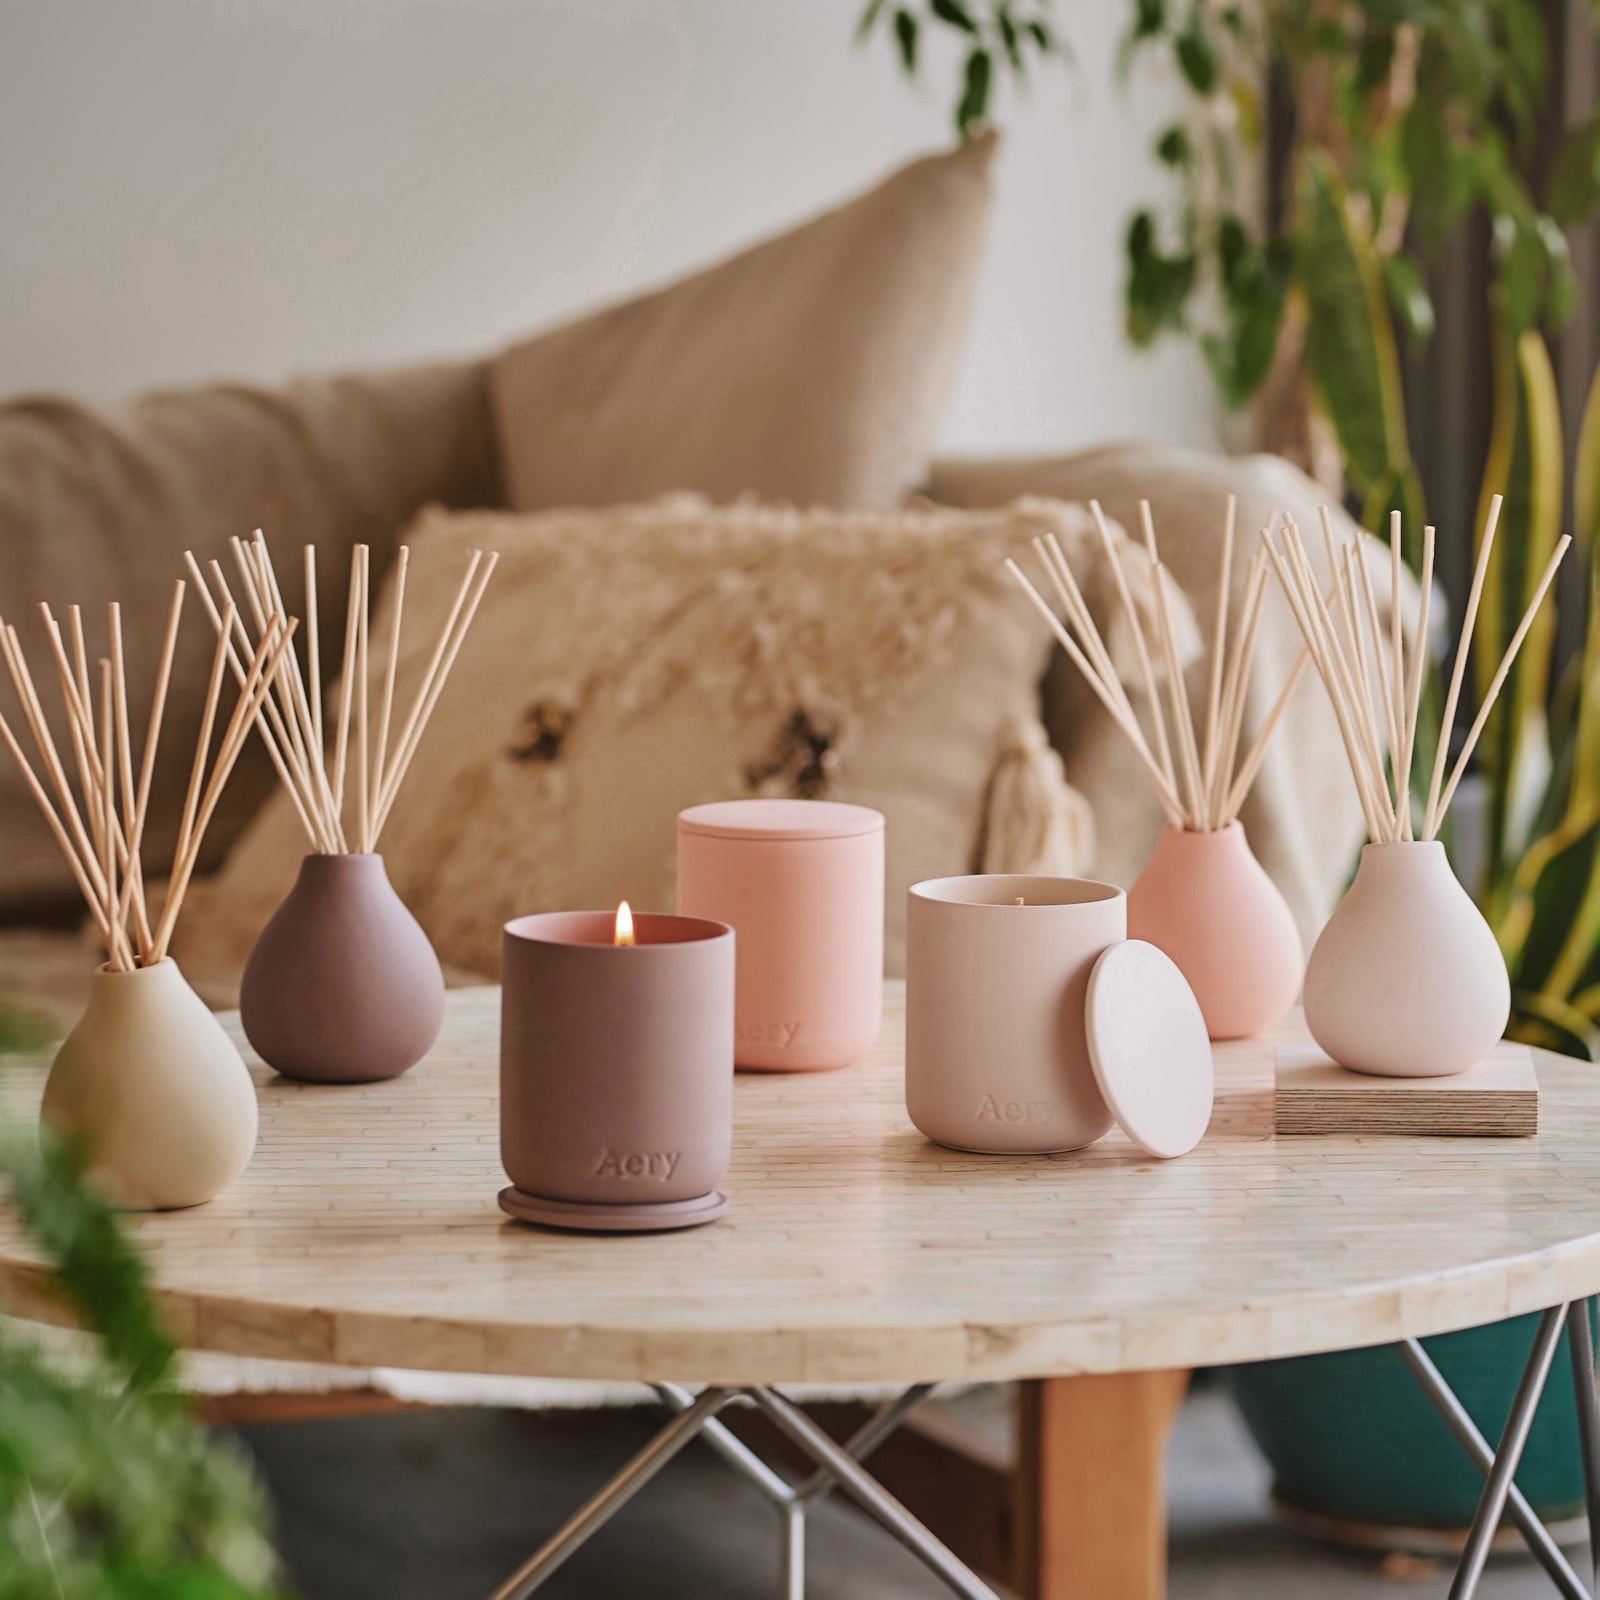 A collection of fernweh aery living candles in pink neutral tones decoratively displayed on coffee table